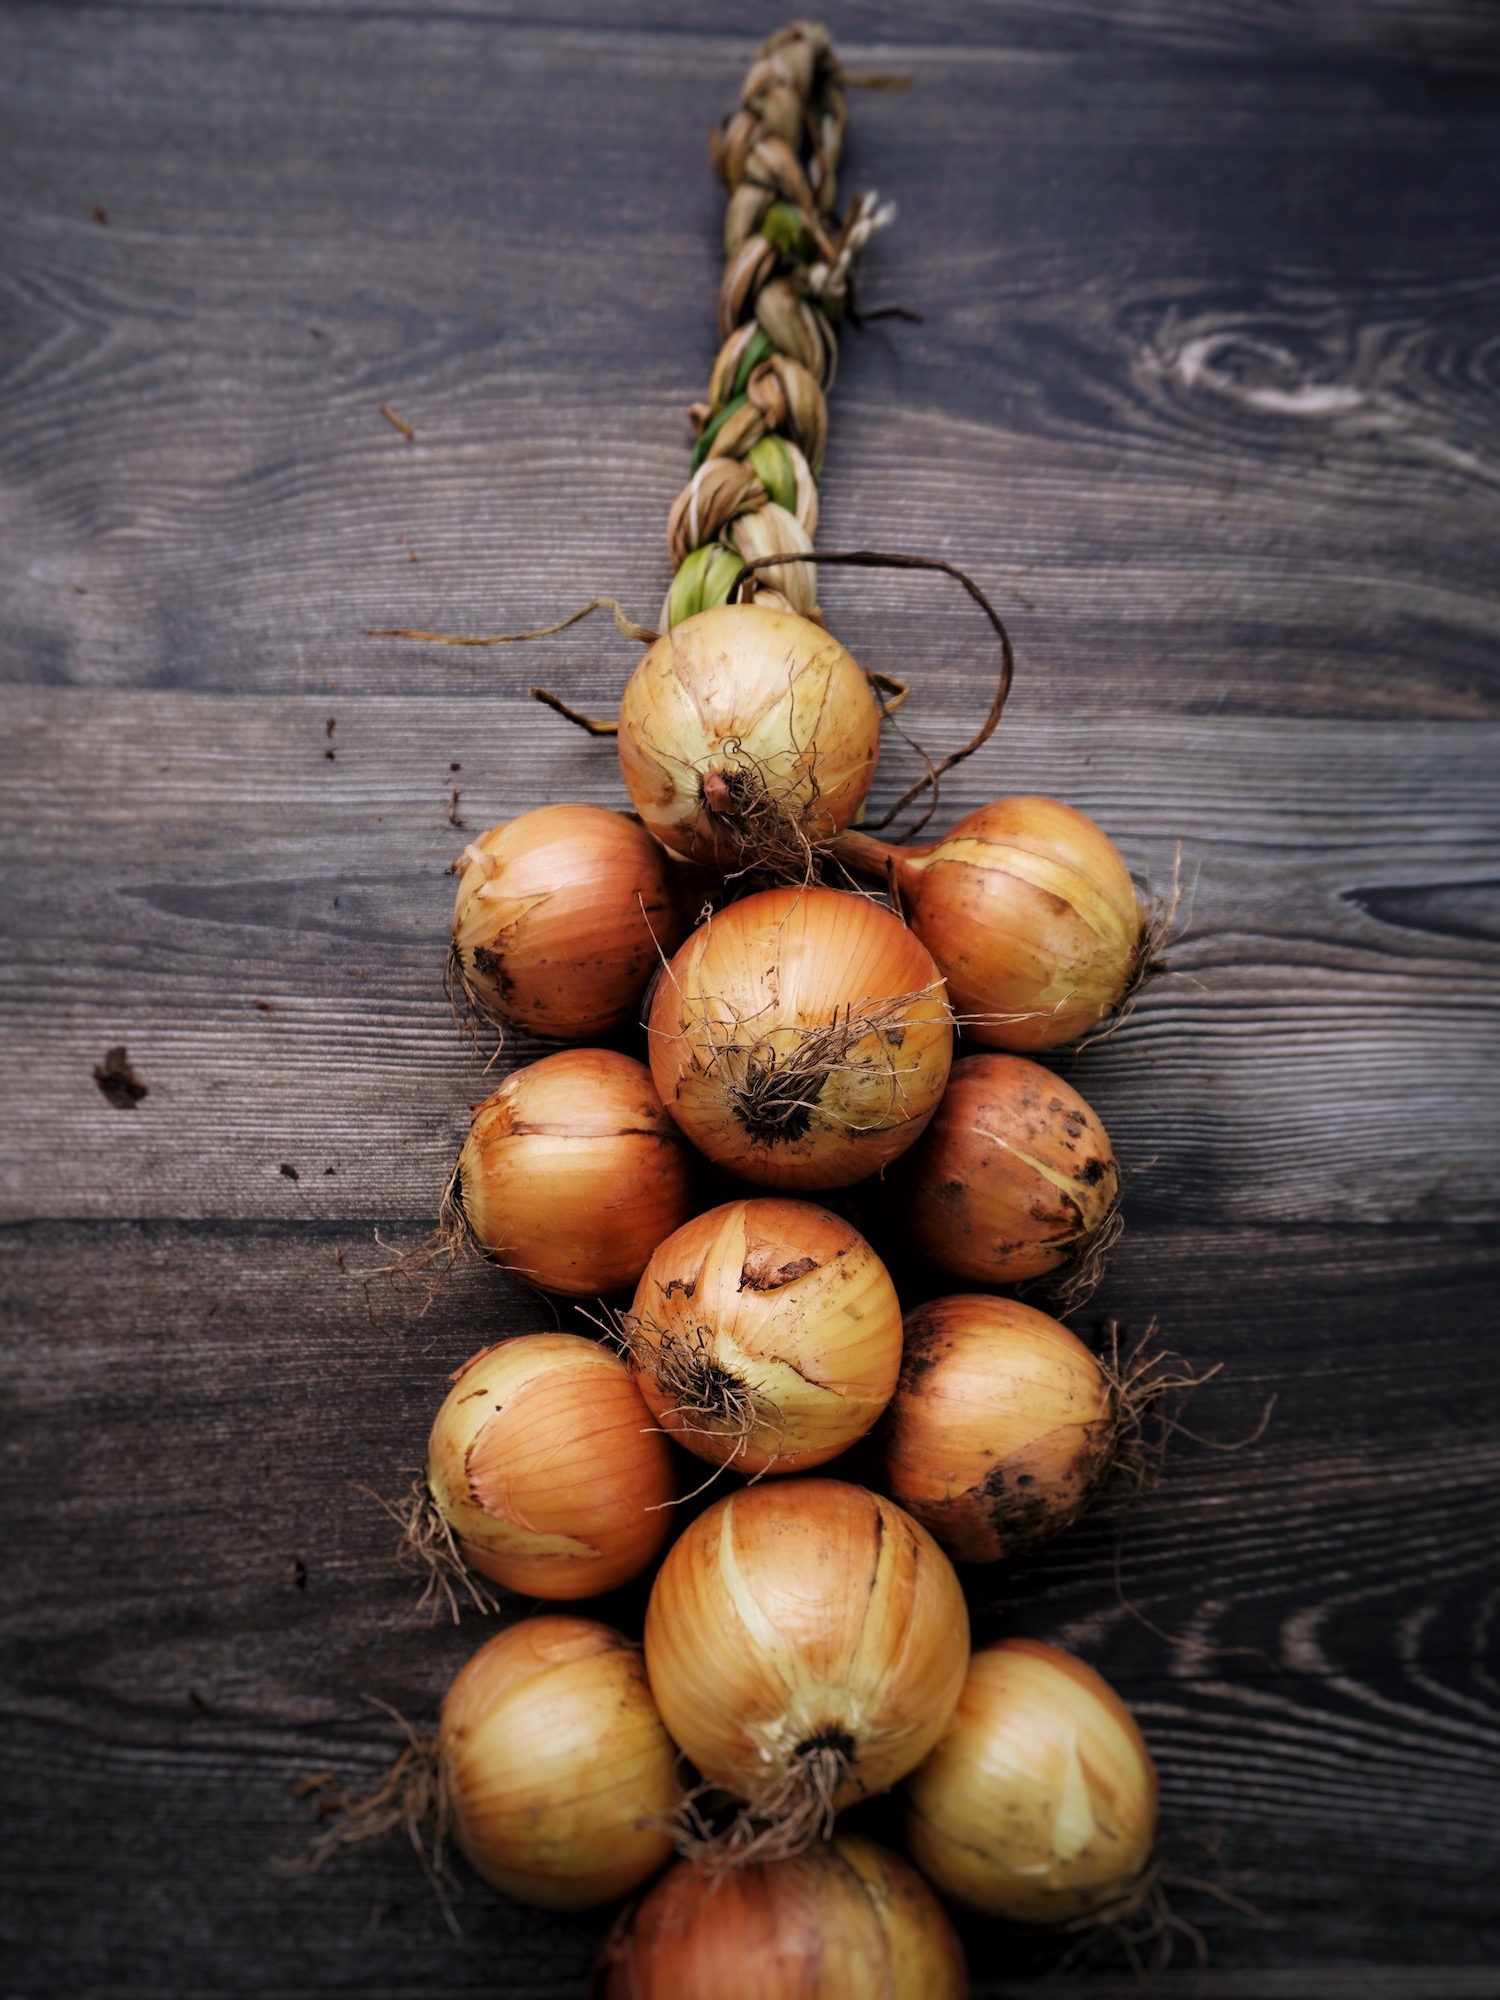 A braided string of onions laying on a wooden background